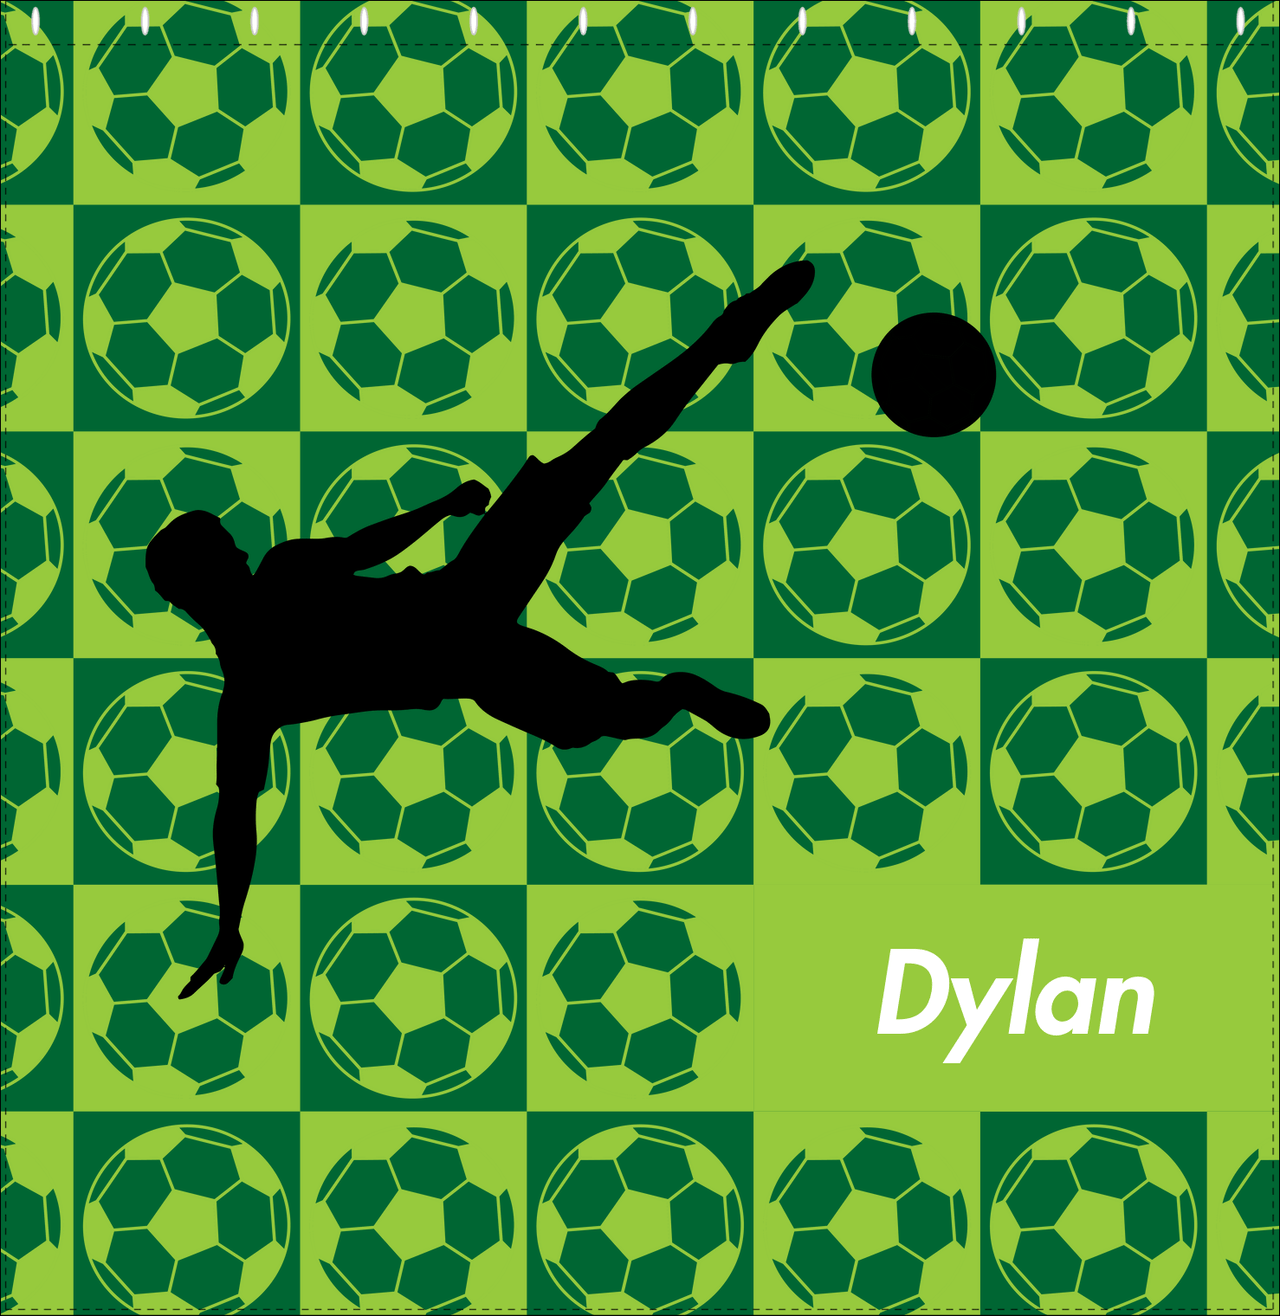 Personalized Soccer Shower Curtain XLVI - Green Background - Boy Silhouette IV - Decorate View